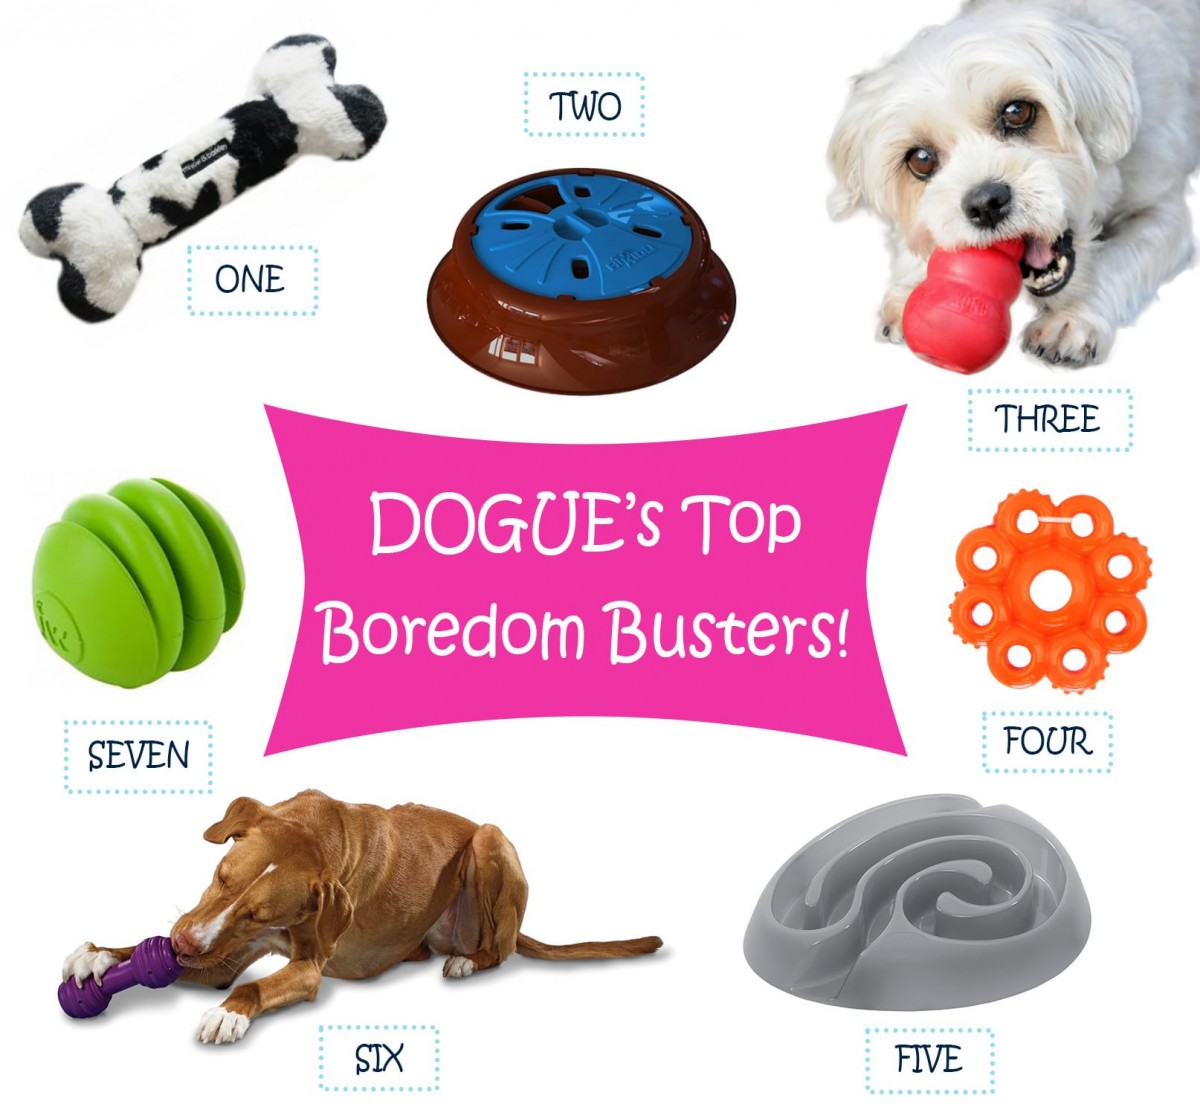 https://cdn.shopify.com/s/files/1/0735/4833/3363/t/5/assets/description_image_Dogues_Top_Boredom_Buster_for_Dogs.jpg?v=1680248818